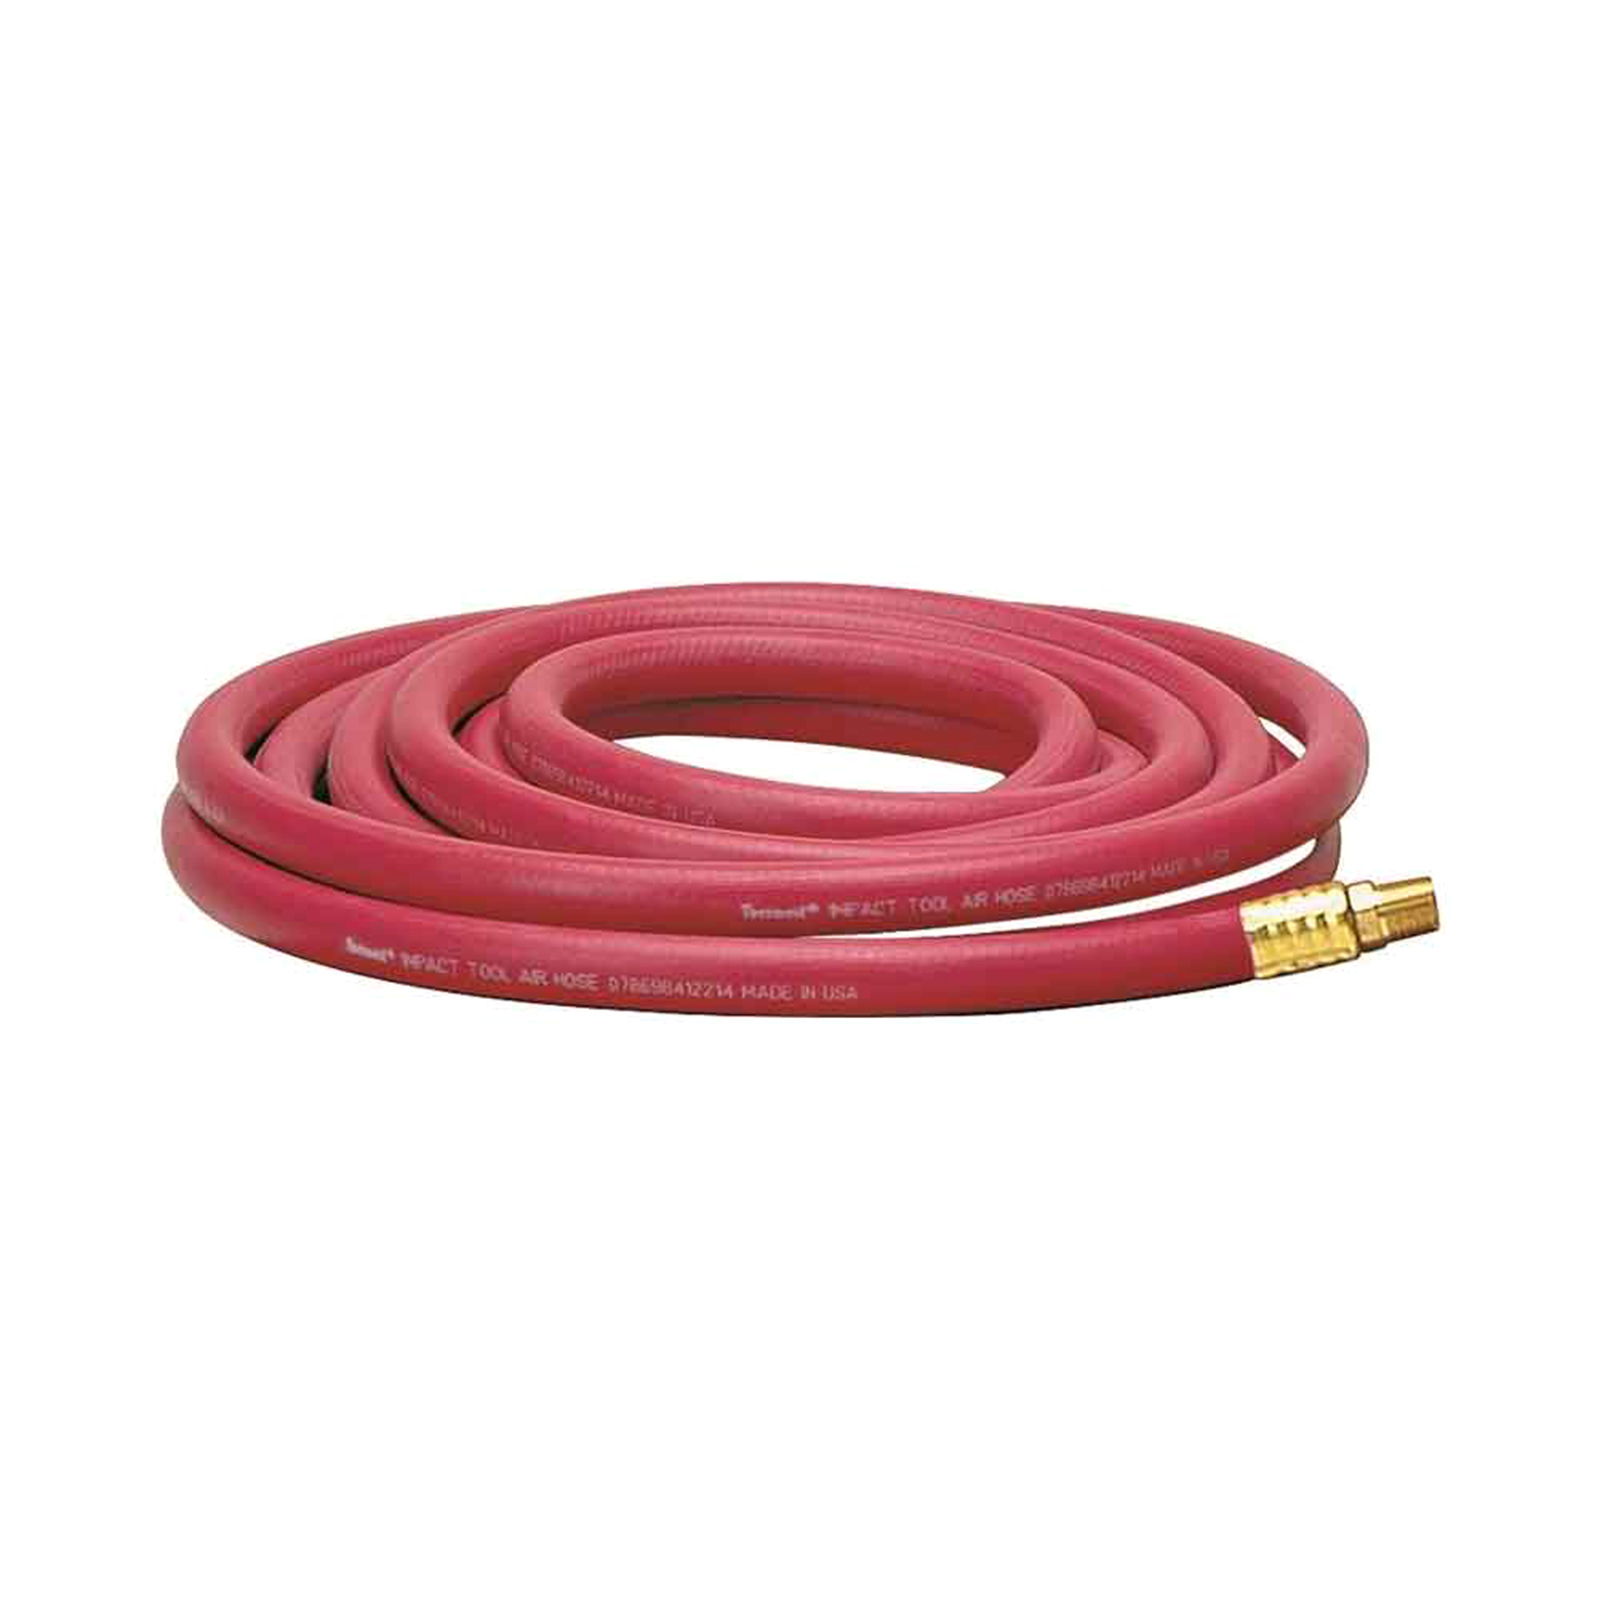 HBD/Thermoid 538-50 3/8" x 50' Coupled Air Hose - Red